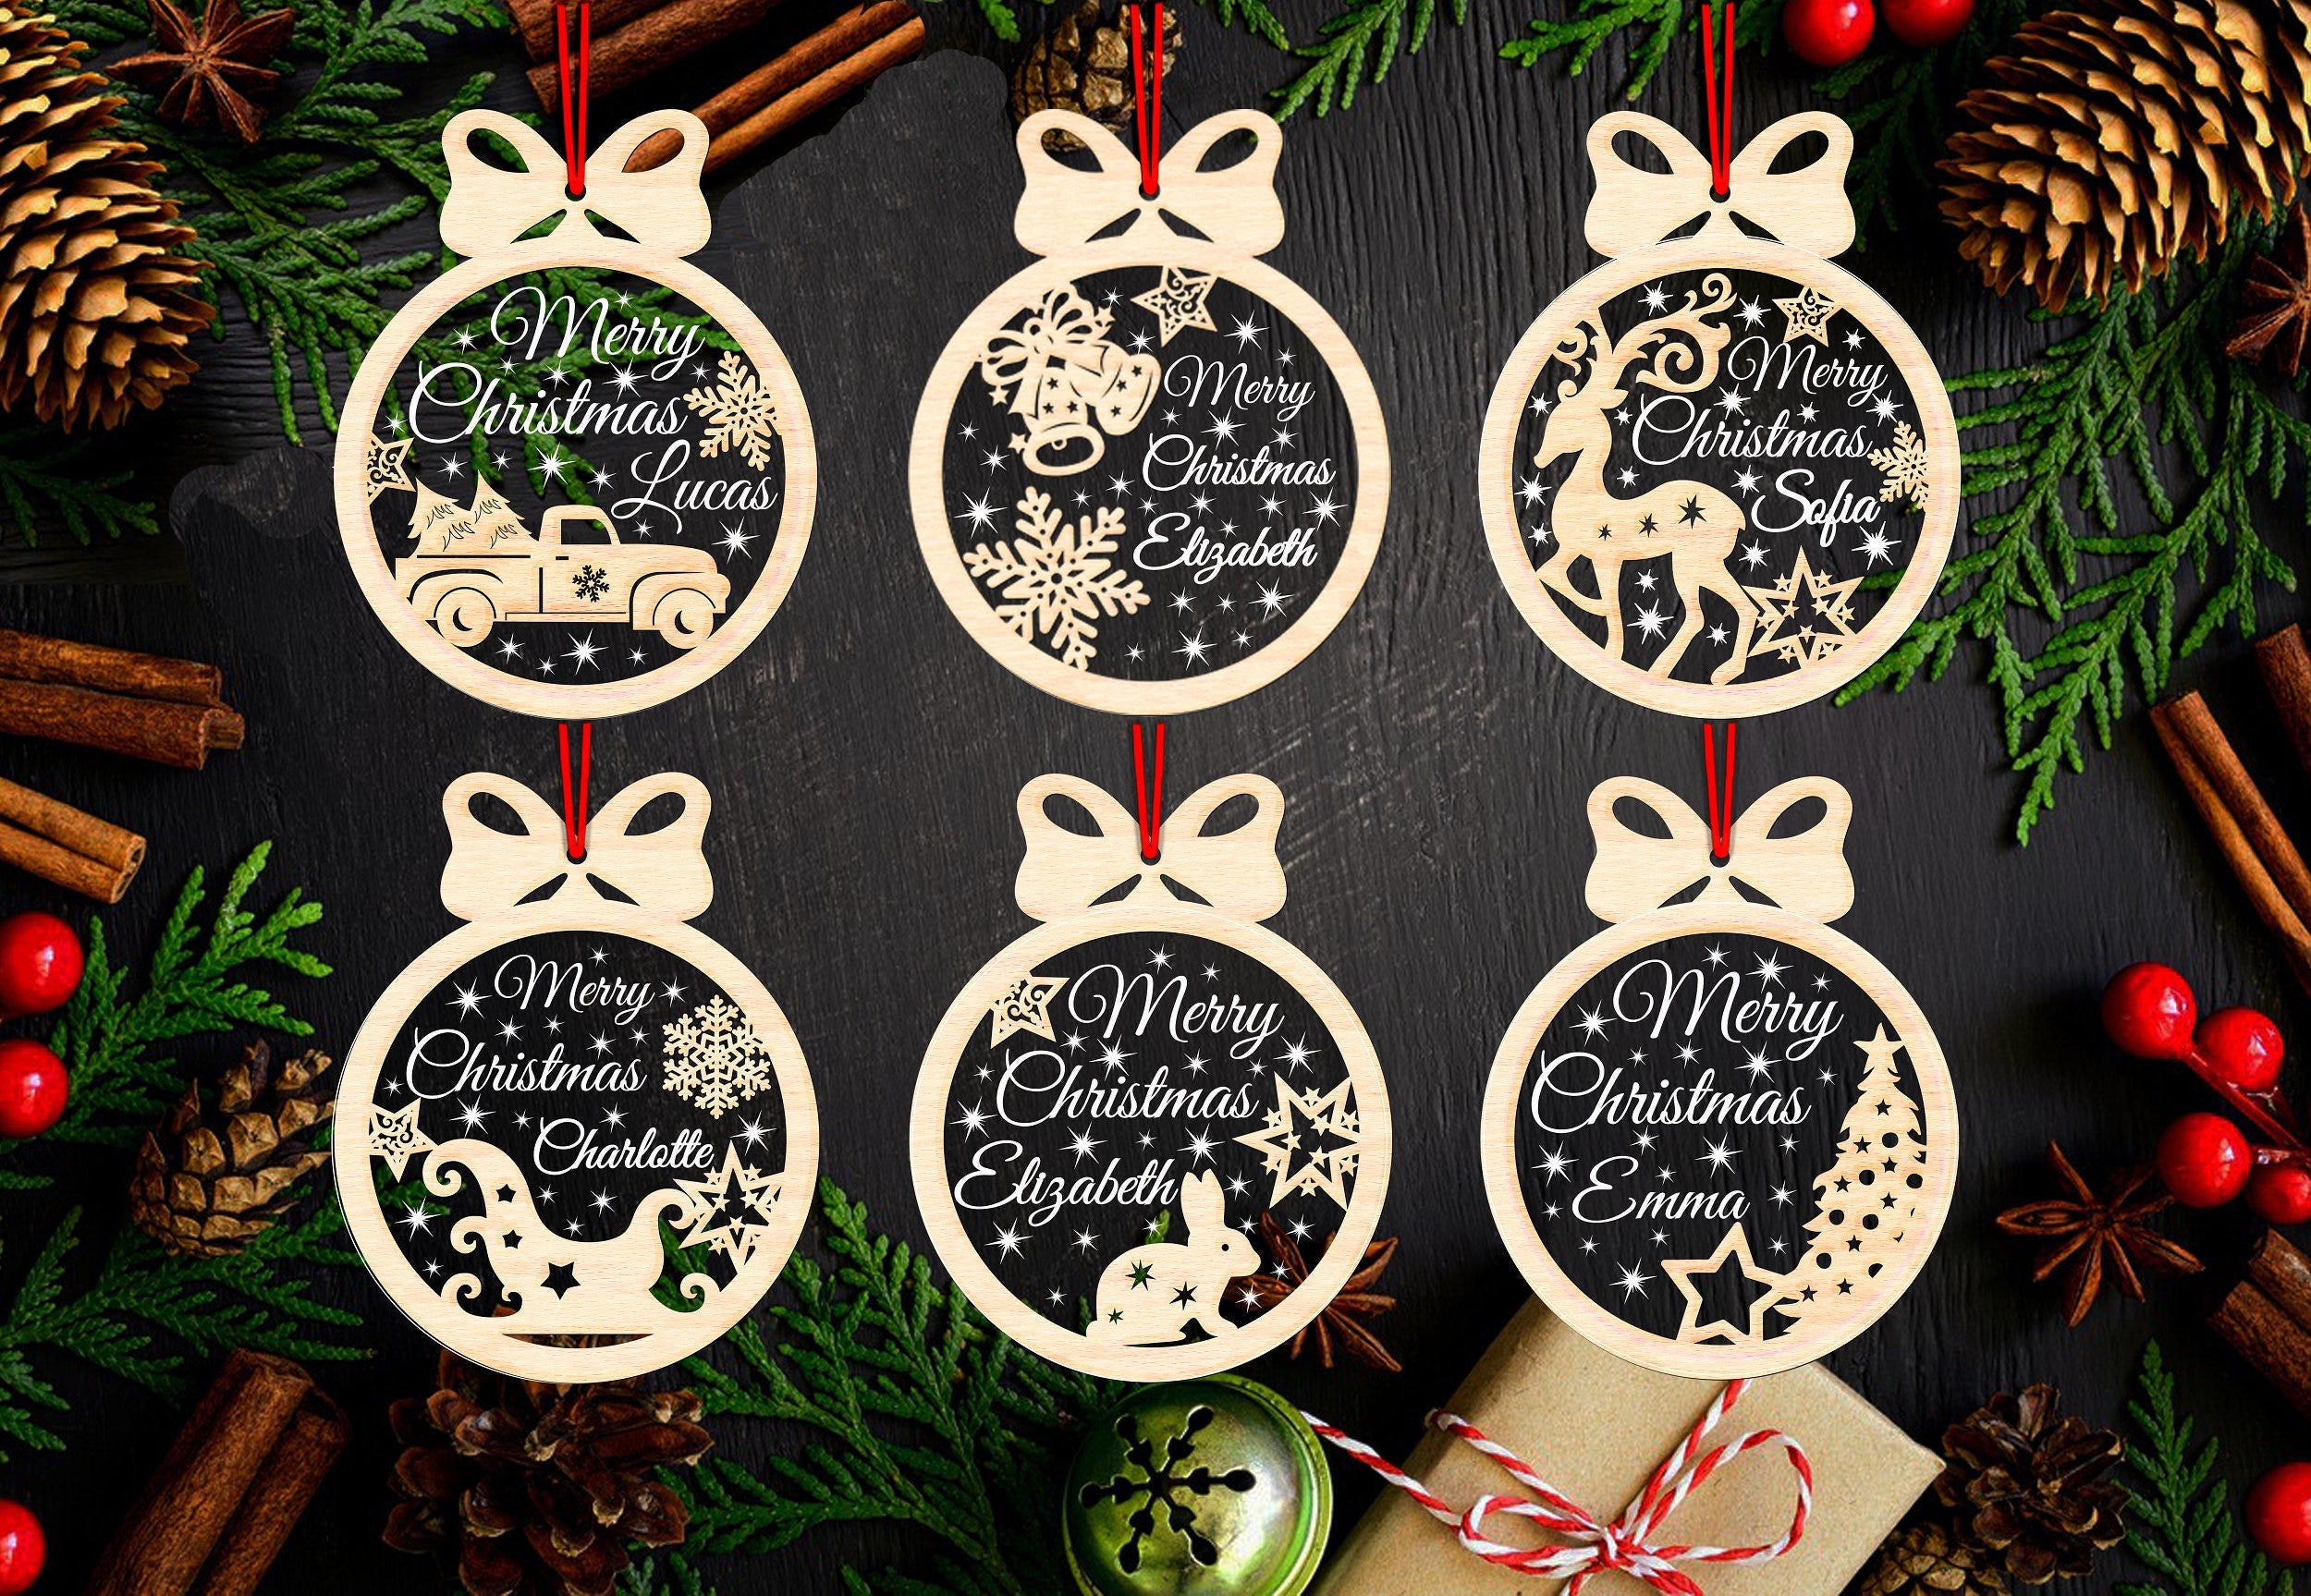 Acrylic Christmas Ornaments SVG Laser Cut Files, Personalizable 6 Designs For Christmas Tree Ornaments With Editable Text, Christmas Toys